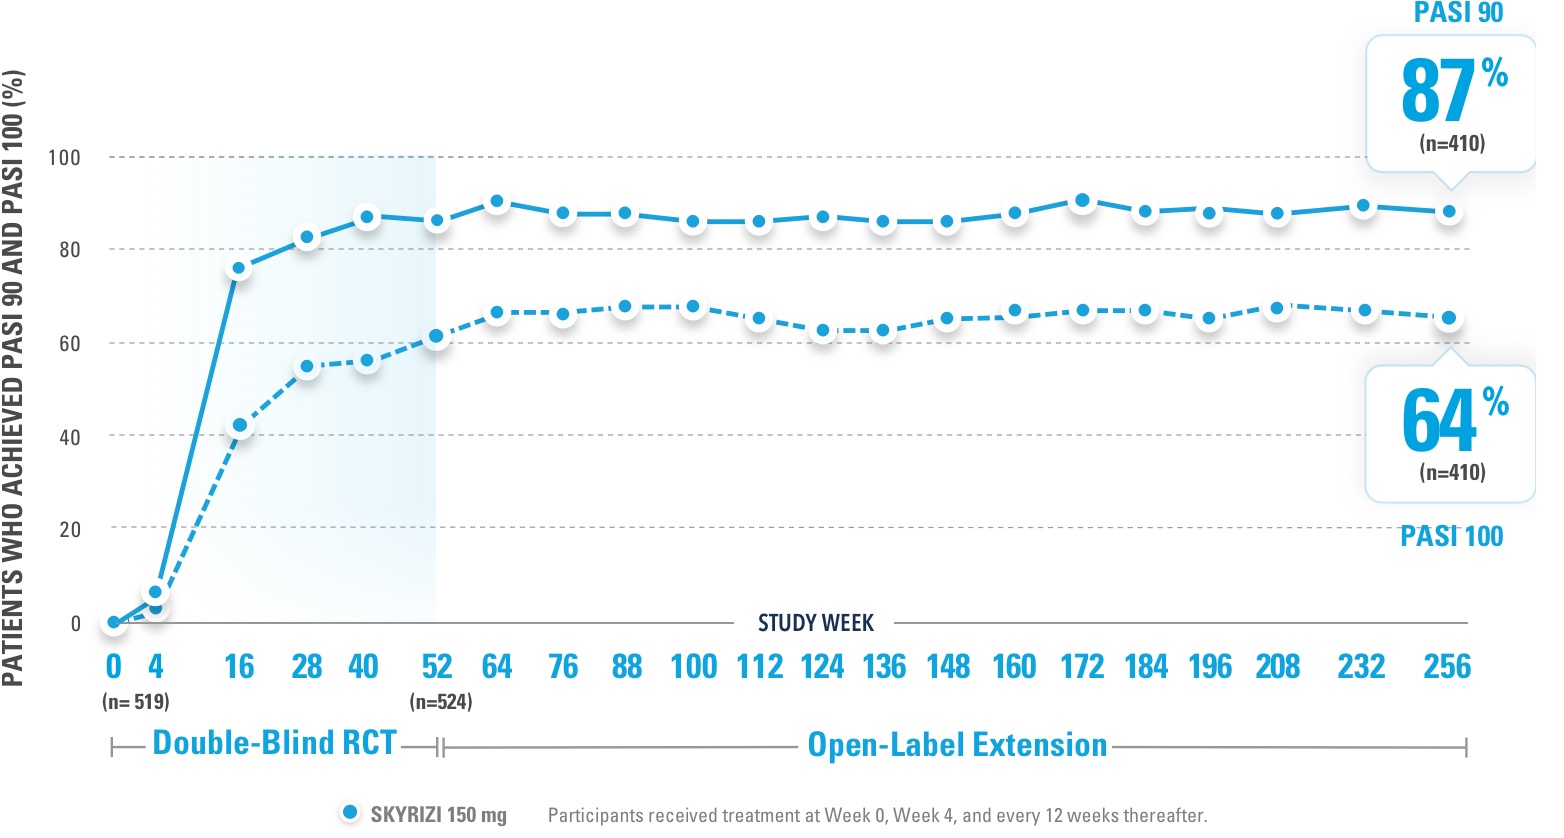 PASI 90 and PASI 100 achievement at week 232 in the open-label extension (OLE).